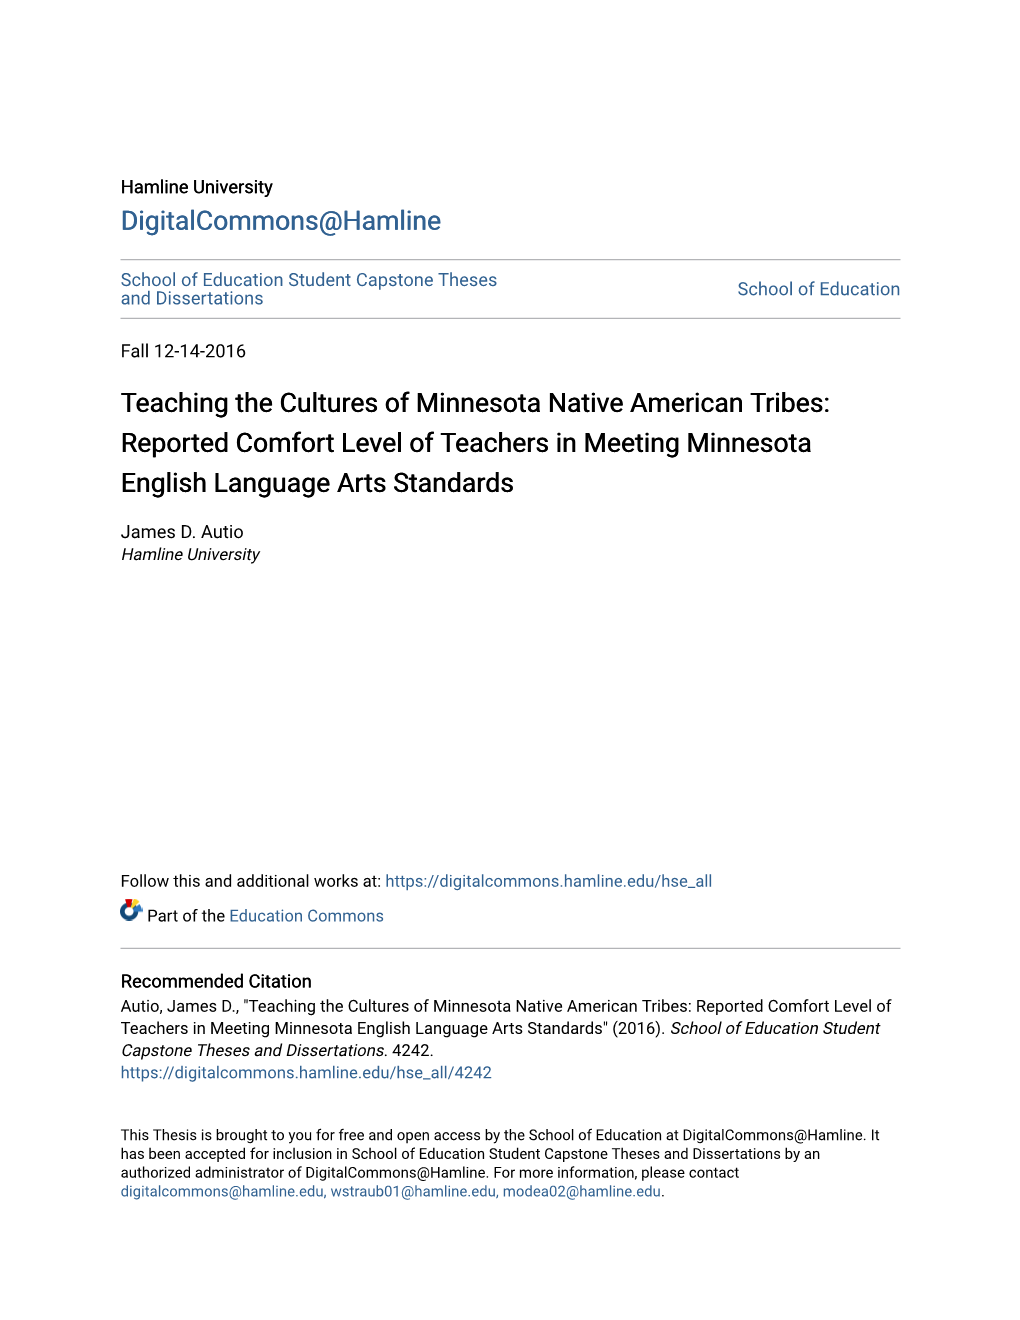 Teaching the Cultures of Minnesota Native American Tribes: Reported Comfort Level of Teachers in Meeting Minnesota English Language Arts Standards